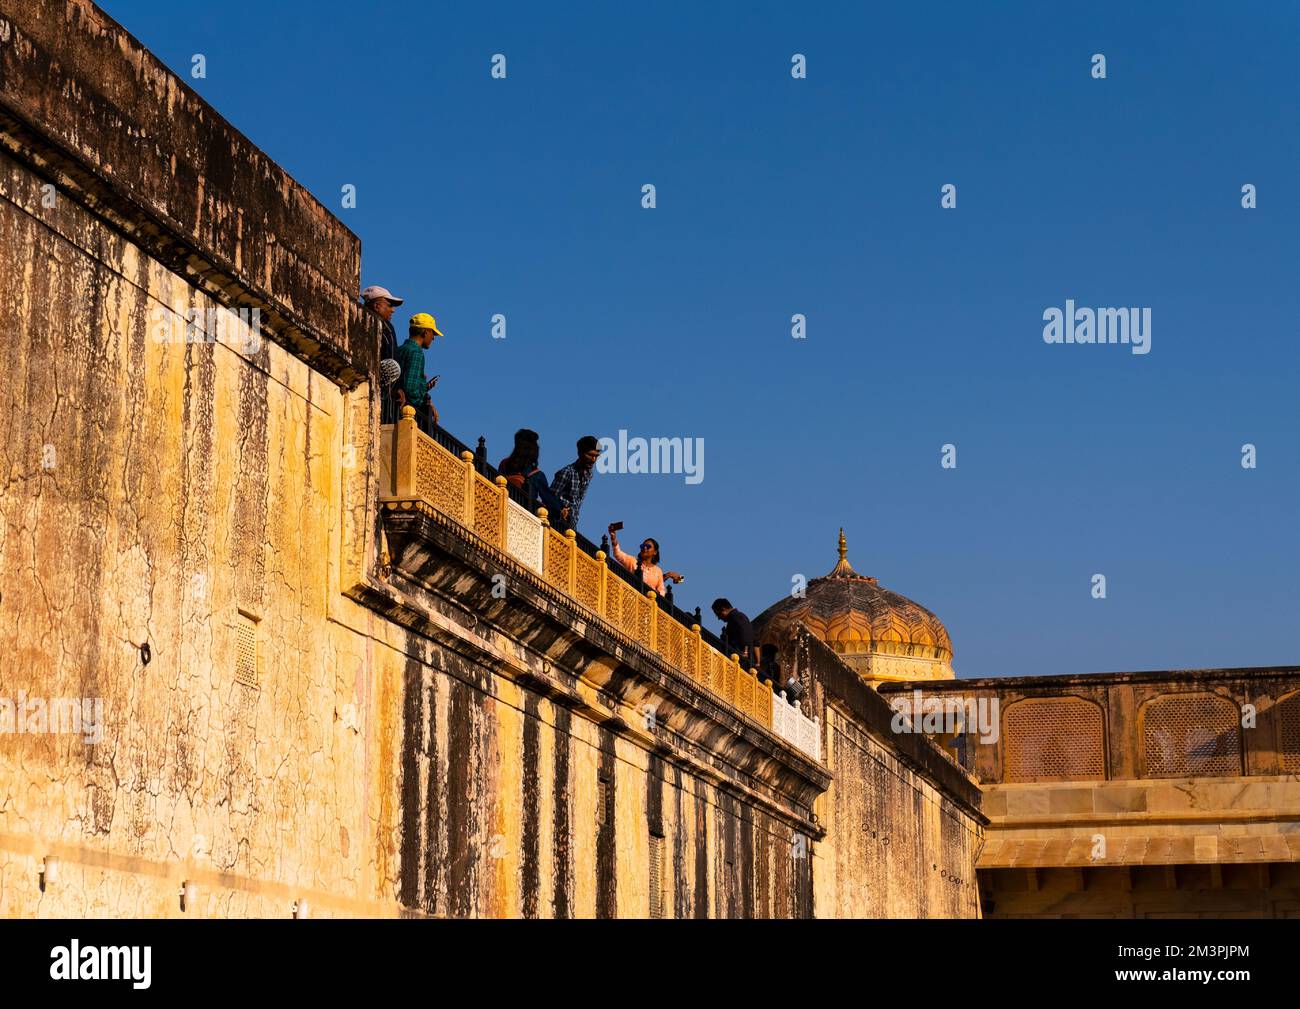 Tourists on Amber Fort rampart, Rajasthan, Amer, India Stock Photo